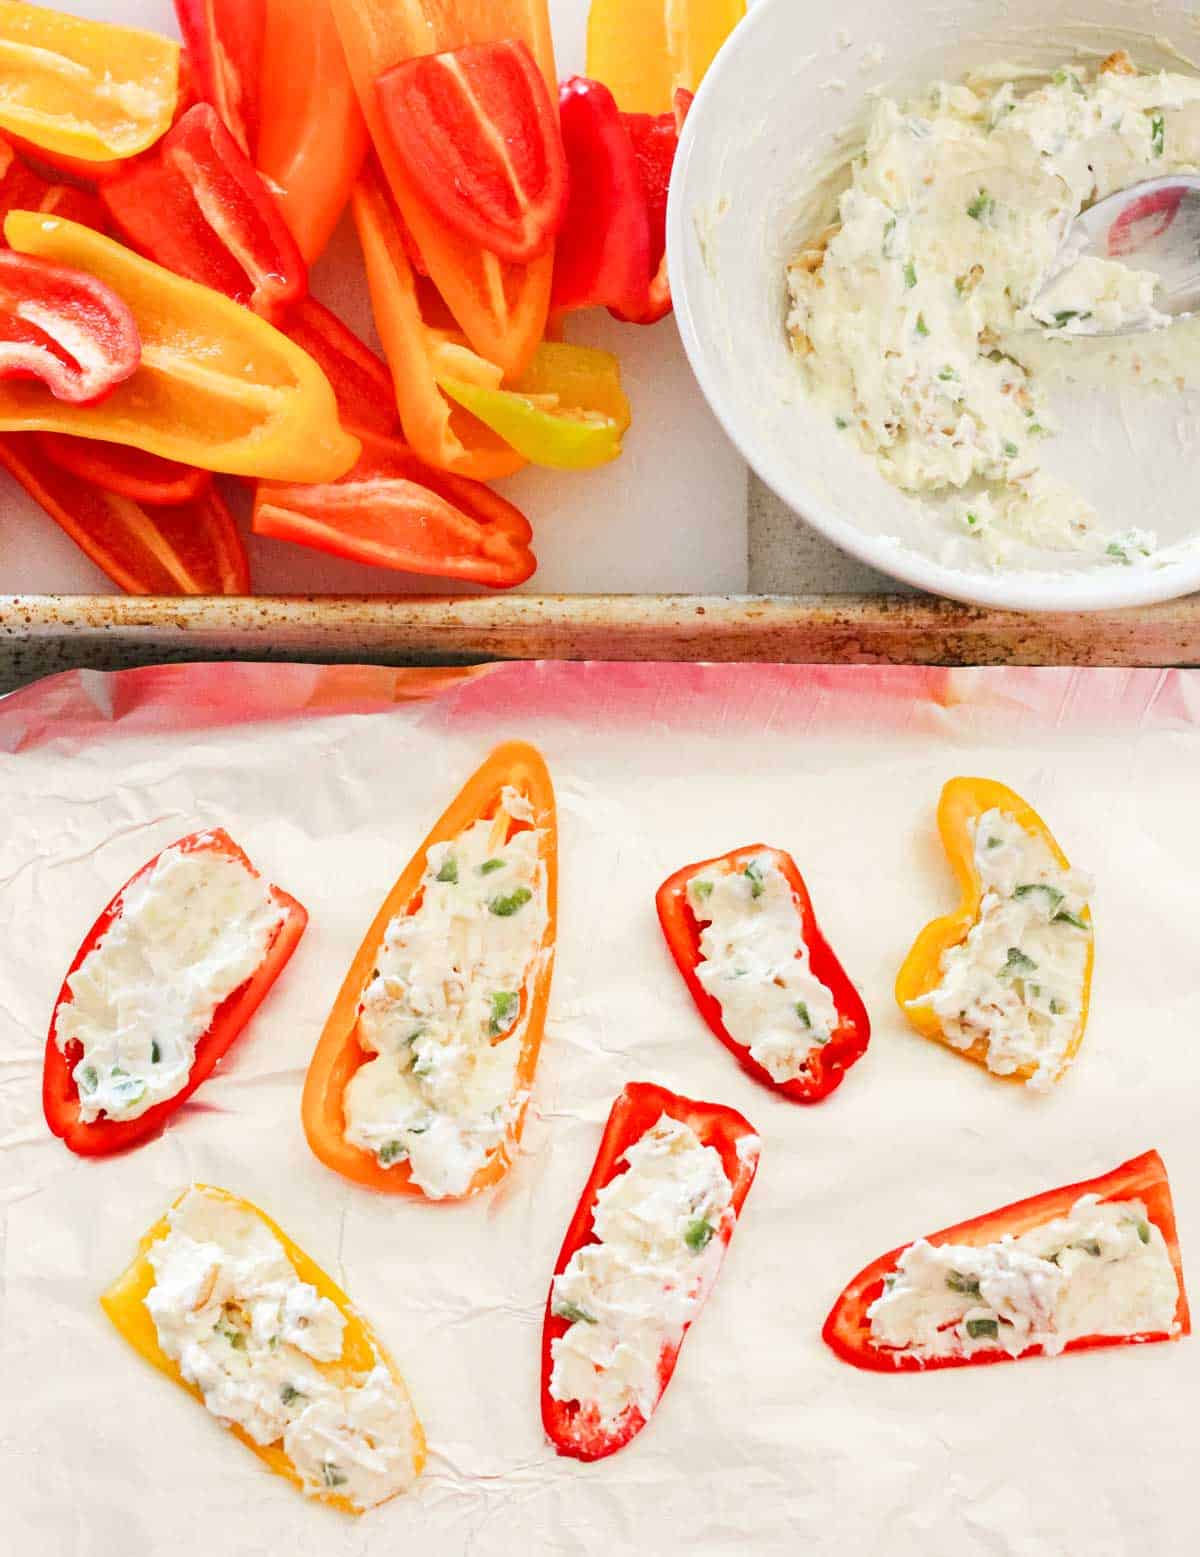 halved mini bell peppers, a bowl of cream cheese, and a foil lined baking sheet with cream cheese stuffed bell peppers.